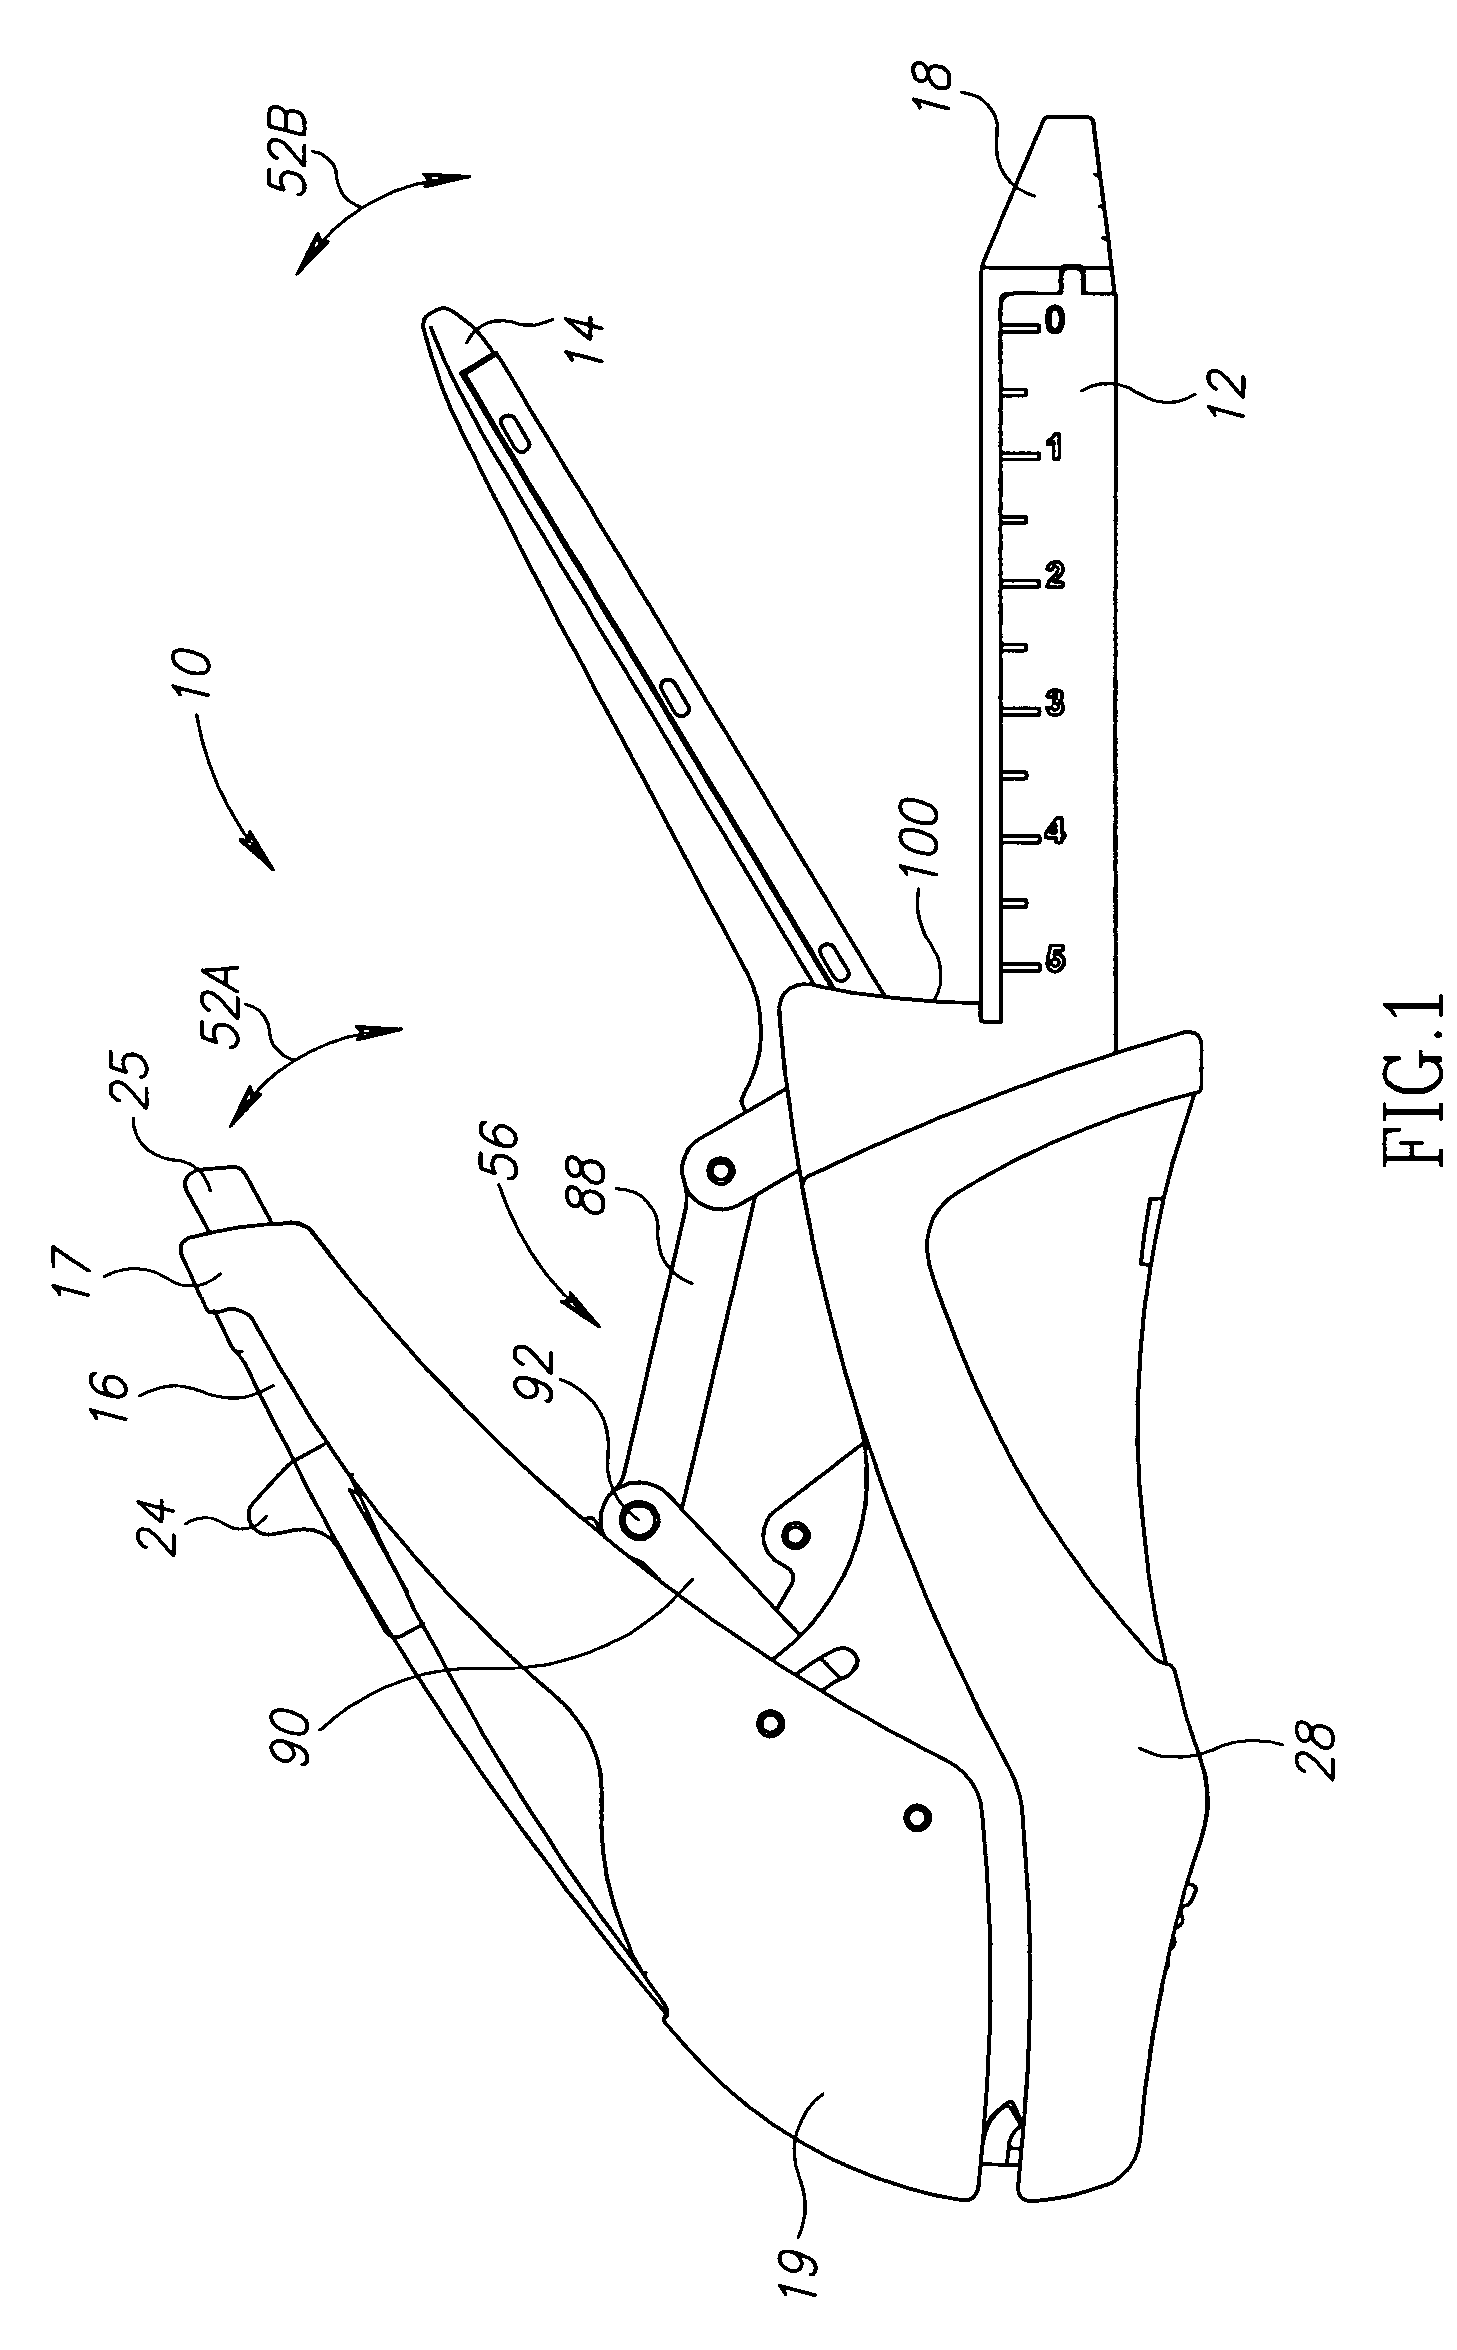 Palm-size surgical stapler for single hand operation